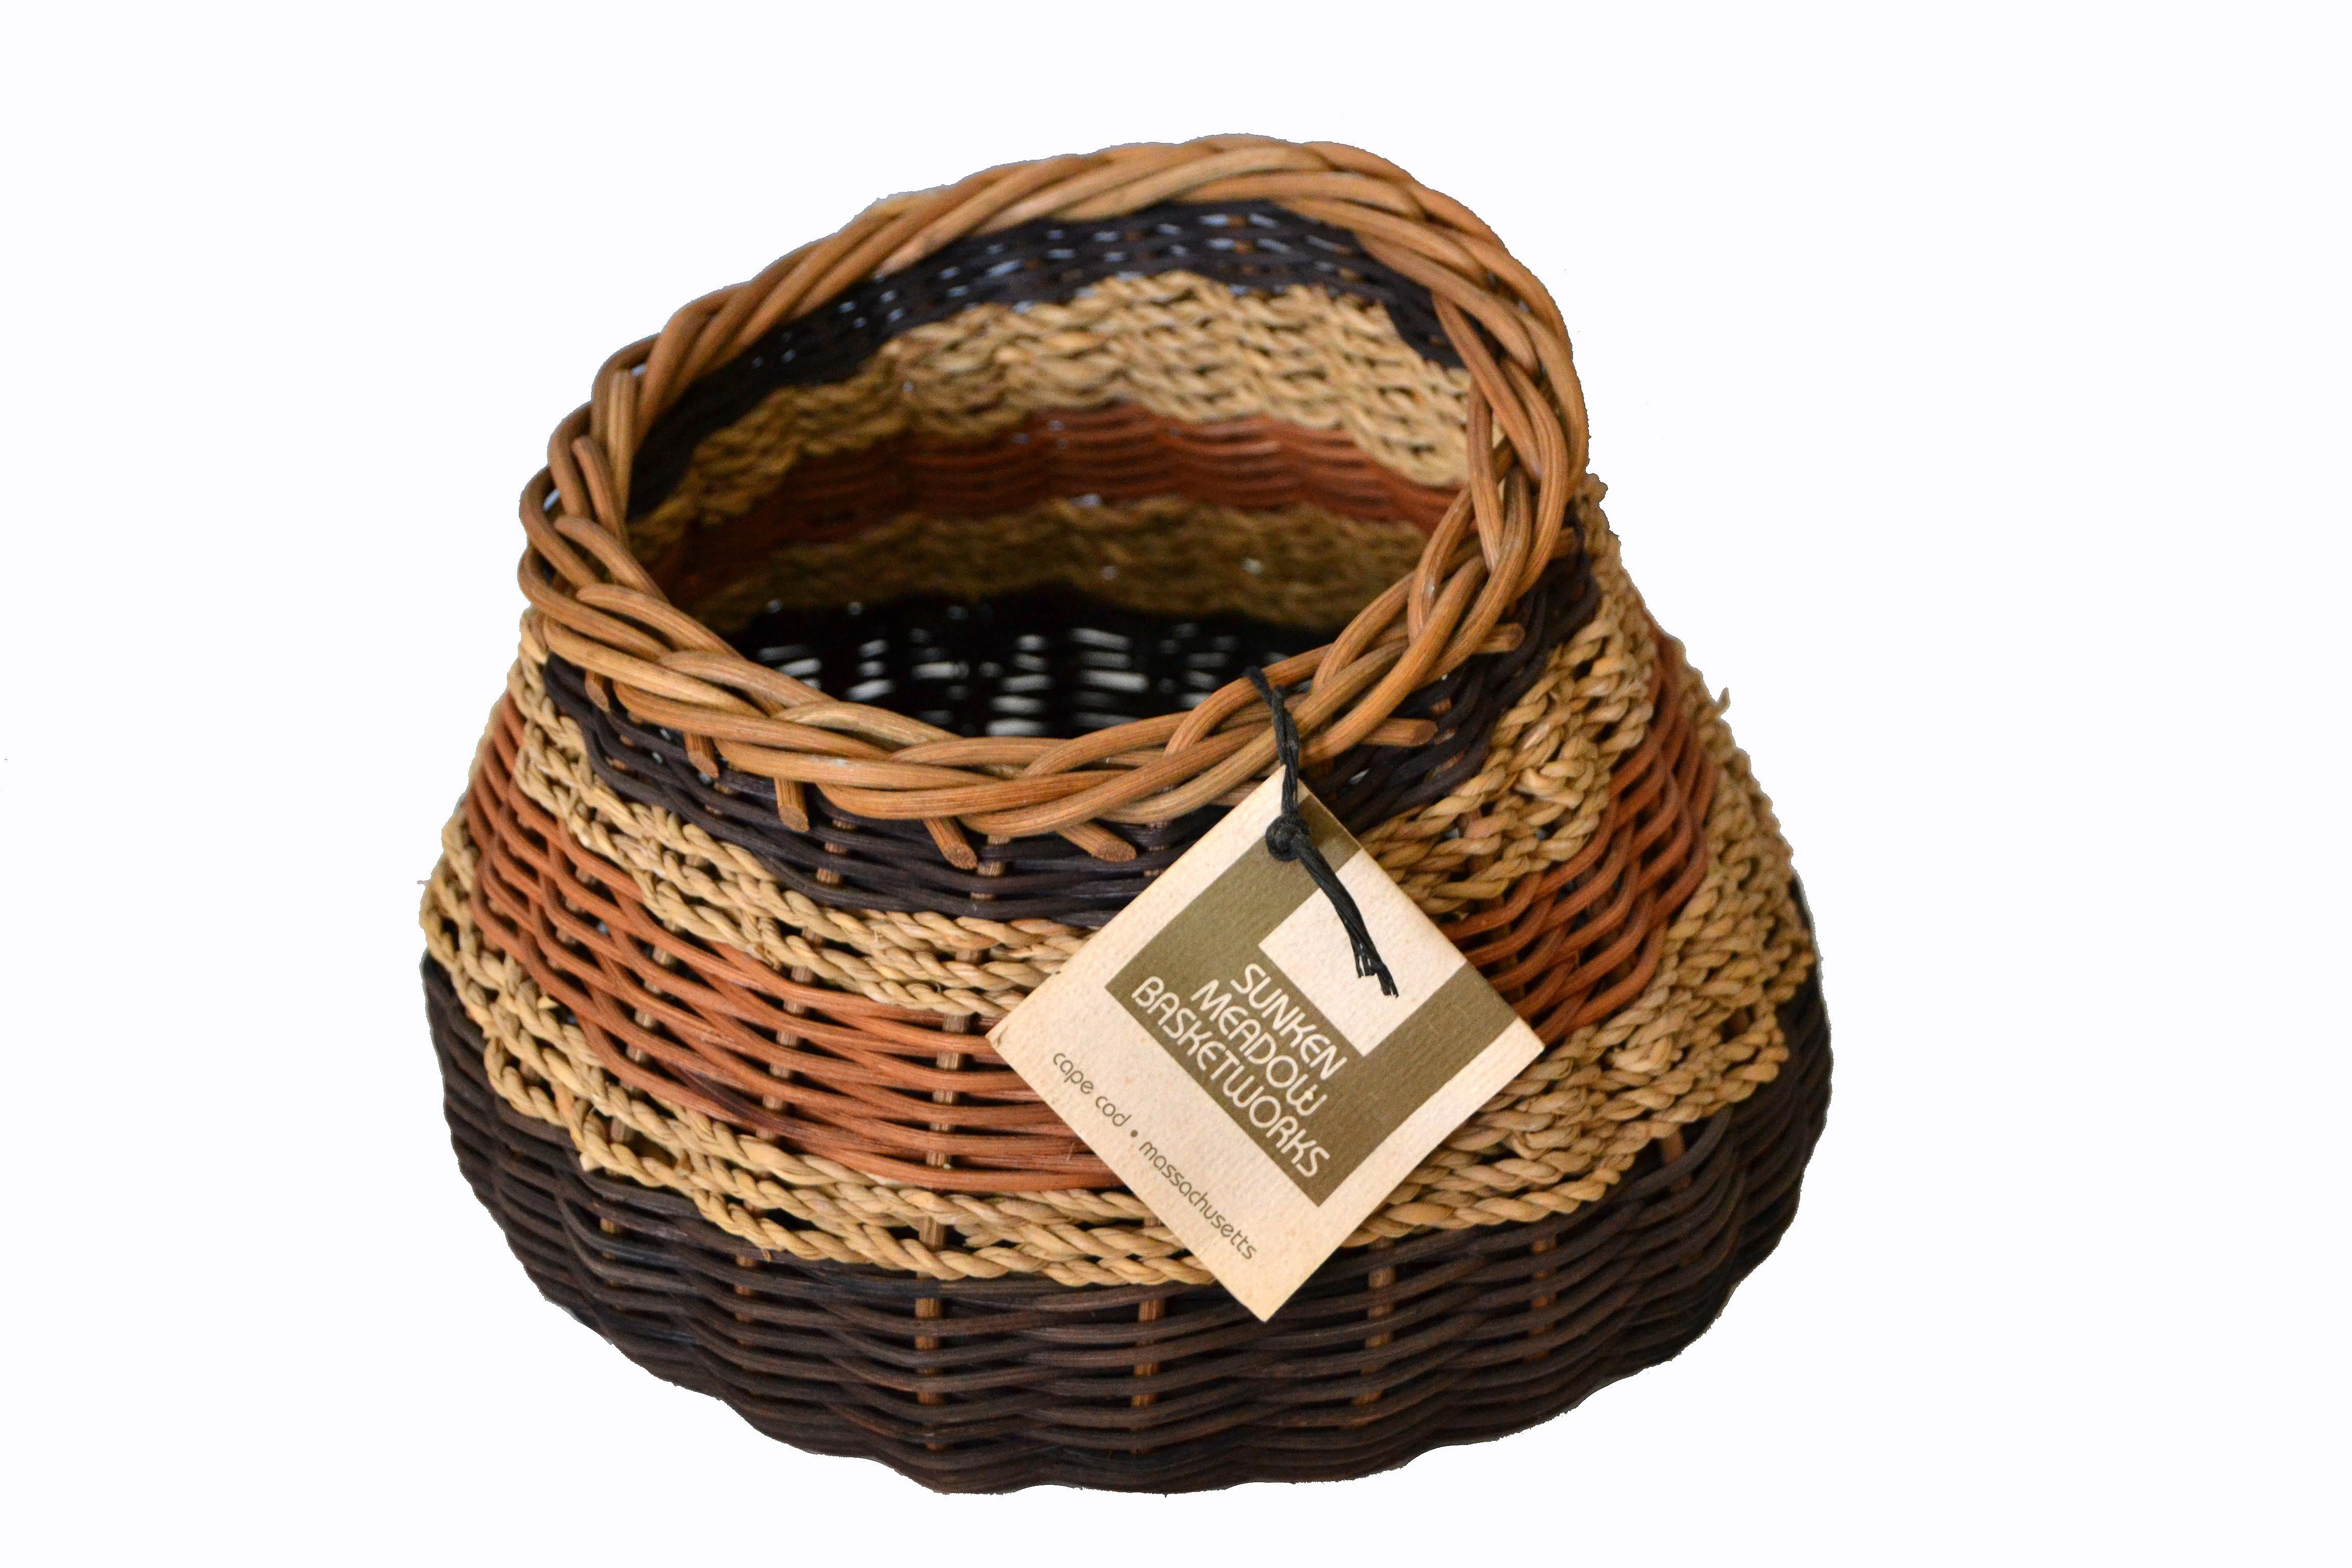 Boho chic handcrafted woven reed and seagrass Nancy basket by Paulette Lenney, Sunken Meadow Basketworks.
Great unique form and shape made out of natural materials, an accent piece for any decor.
Comes with the original paper tag.